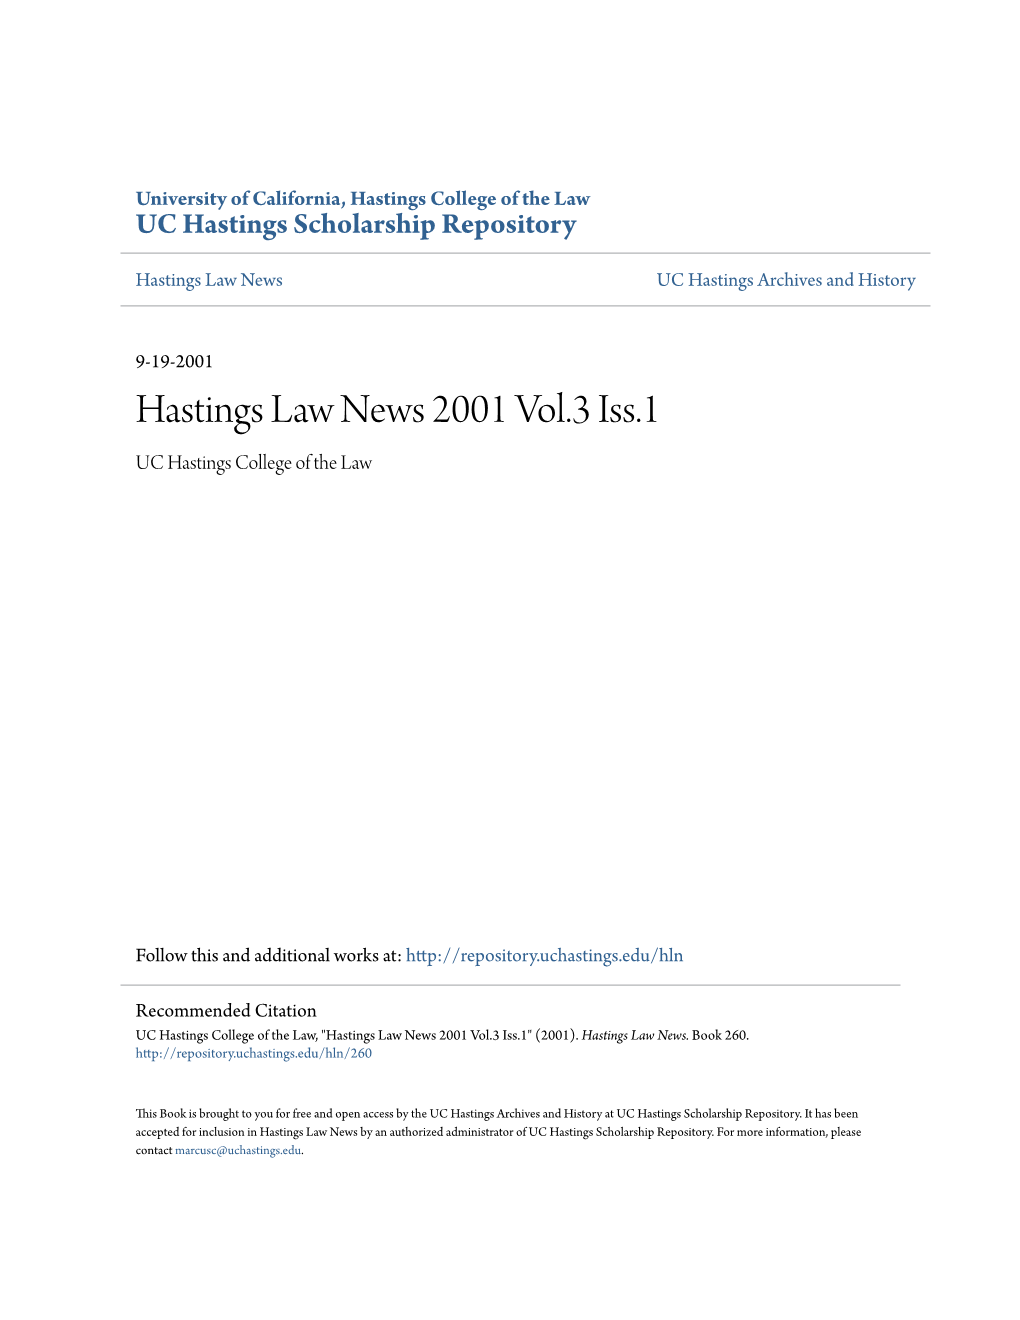 Hastings Law News 2001 Vol.3 Iss.1 UC Hastings College of the Law